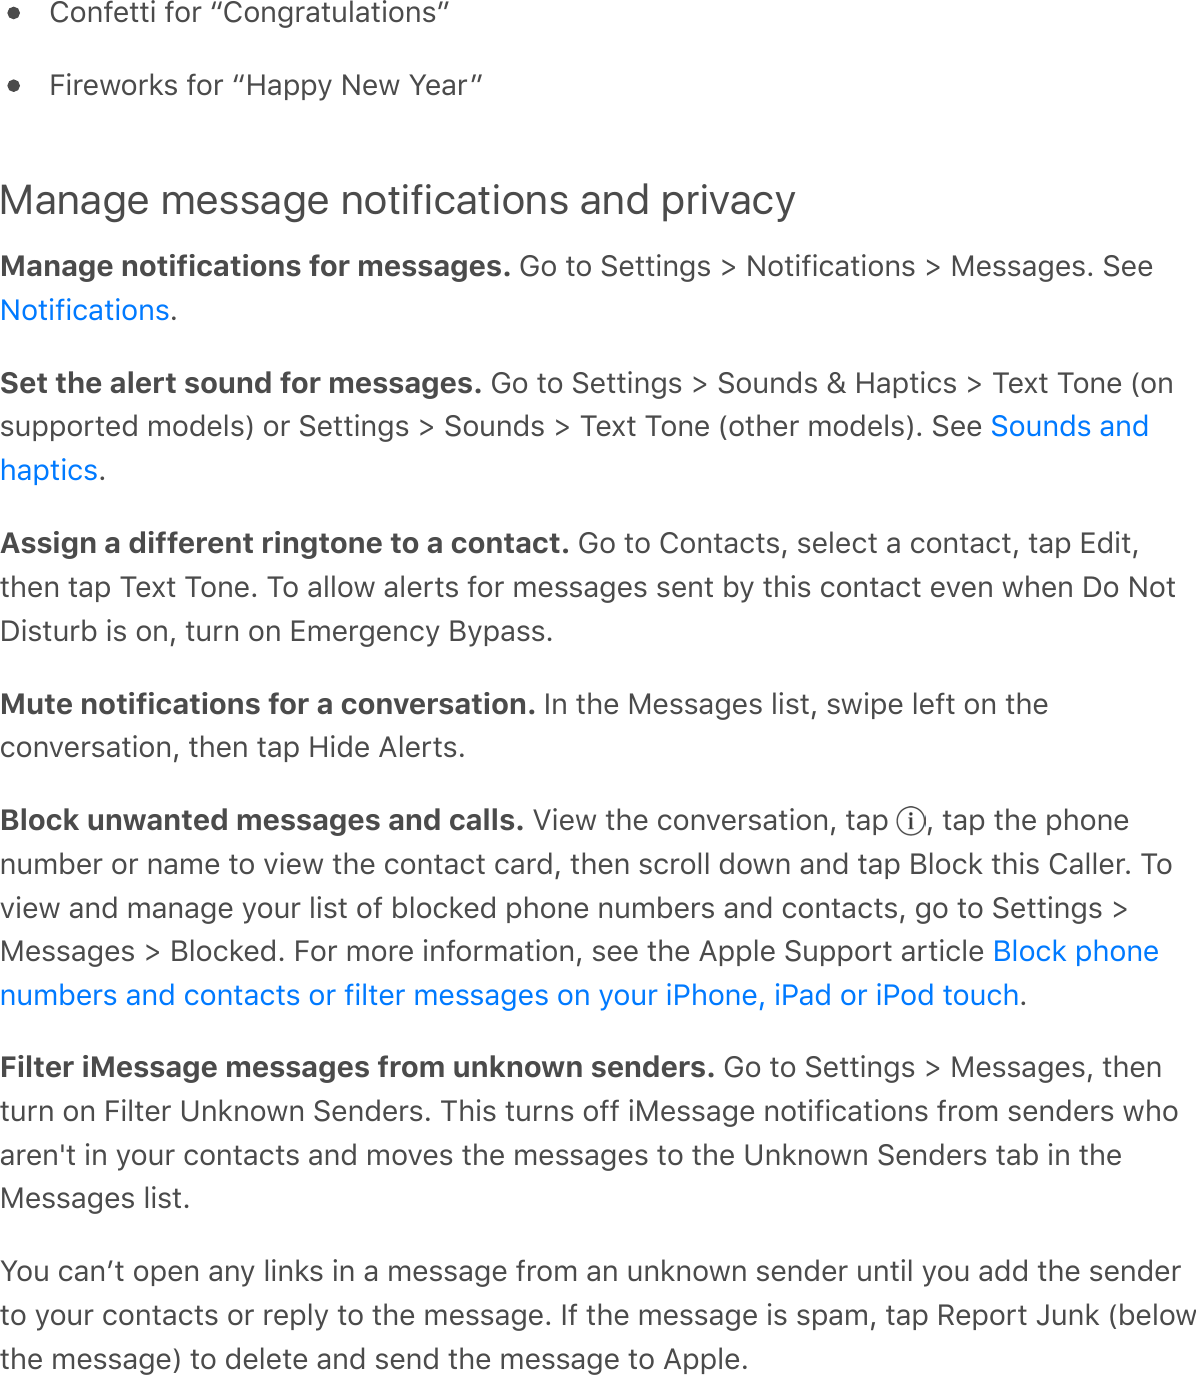 T$%7&amp;**!&apos;7$0&apos;bT$%40-*6.-*!$%,c5!0&amp;3$02,&apos;7$0&apos;b`-;;&gt;&apos;E&amp;3&apos;S&amp;-0cManage message notifications and privacyManage notifications for messages. M$&apos;*$&apos;:&amp;**!%4,&apos;e&apos;E$*!7!/-*!$%,&apos;e&apos;H&amp;,,-4&amp;,G&apos;:&amp;&amp;GSet the alert sound for messages. M$&apos;*$&apos;:&amp;**!%4,&apos;e&apos;:$6%C,&apos;j&apos;`-;*!/,&apos;e&apos;?&amp;^*&apos;?$%&amp;&apos;\$%,6;;$0*&amp;C&apos;9$C&amp;.,]&apos;$0&apos;:&amp;**!%4,&apos;e&apos;:$6%C,&apos;e&apos;?&amp;^*&apos;?$%&amp;&apos;\$*#&amp;0&apos;9$C&amp;.,]G&apos;:&amp;&amp;&apos;GAssign a different ringtone to a contact. M$&apos;*$&apos;T$%*-/*,Q&apos;,&amp;.&amp;/*&apos;-&apos;/$%*-/*Q&apos;*-;&apos;XC!*Q*#&amp;%&apos;*-;&apos;?&amp;^*&apos;?$%&amp;G&apos;?$&apos;-..$3&apos;-.&amp;0*,&apos;7$0&apos;9&amp;,,-4&amp;,&apos;,&amp;%*&apos;F&gt;&apos;*#!,&apos;/$%*-/*&apos;&amp;A&amp;%&apos;3#&amp;%&apos;&lt;$&apos;E$*&lt;!,*60F&apos;!,&apos;$%Q&apos;*60%&apos;$%&apos;X9&amp;04&amp;%/&gt;&apos;P&gt;;-,,GMute notifications for a conversation. )%&apos;*#&amp;&apos;H&amp;,,-4&amp;,&apos;.!,*Q&apos;,3!;&amp;&apos;.&amp;7*&apos;$%&apos;*#&amp;/$%A&amp;0,-*!$%Q&apos;*#&amp;%&apos;*-;&apos;`!C&amp;&apos;B.&amp;0*,GBlock unwanted messages and calls. Z!&amp;3&apos;*#&amp;&apos;/$%A&amp;0,-*!$%Q&apos;*-;&apos; Q&apos;*-;&apos;*#&amp;&apos;;#$%&amp;%69F&amp;0&apos;$0&apos;%-9&amp;&apos;*$&apos;A!&amp;3&apos;*#&amp;&apos;/$%*-/*&apos;/-0CQ&apos;*#&amp;%&apos;,/0$..&apos;C$3%&apos;-%C&apos;*-;&apos;P.$/2&apos;*#!,&apos;T-..&amp;0G&apos;?$A!&amp;3&apos;-%C&apos;9-%-4&amp;&apos;&gt;$60&apos;.!,*&apos;$7&apos;F.$/2&amp;C&apos;;#$%&amp;&apos;%69F&amp;0,&apos;-%C&apos;/$%*-/*,Q&apos;4$&apos;*$&apos;:&amp;**!%4,&apos;eH&amp;,,-4&amp;,&apos;e&apos;P.$/2&amp;CG&apos;5$0&apos;9$0&amp;&apos;!%7$09-*!$%Q&apos;,&amp;&amp;&apos;*#&amp;&apos;B;;.&amp;&apos;:6;;$0*&apos;-0*!/.&amp;&apos;GFilter iMessage messages from unknown senders. M$&apos;*$&apos;:&amp;**!%4,&apos;e&apos;H&amp;,,-4&amp;,Q&apos;*#&amp;%*60%&apos;$%&apos;5!.*&amp;0&apos;1%2%$3%&apos;:&amp;%C&amp;0,G&apos;?#!,&apos;*60%,&apos;$77&apos;!H&amp;,,-4&amp;&apos;%$*!7!/-*!$%,&apos;70$9&apos;,&amp;%C&amp;0,&apos;3#$-0&amp;%q*&apos;!%&apos;&gt;$60&apos;/$%*-/*,&apos;-%C&apos;9$A&amp;,&apos;*#&amp;&apos;9&amp;,,-4&amp;,&apos;*$&apos;*#&amp;&apos;1%2%$3%&apos;:&amp;%C&amp;0,&apos;*-F&apos;!%&apos;*#&amp;H&amp;,,-4&amp;,&apos;.!,*GS$6&apos;/-%+*&apos;$;&amp;%&apos;-%&gt;&apos;.!%2,&apos;!%&apos;-&apos;9&amp;,,-4&amp;&apos;70$9&apos;-%&apos;6%2%$3%&apos;,&amp;%C&amp;0&apos;6%*!.&apos;&gt;$6&apos;-CC&apos;*#&amp;&apos;,&amp;%C&amp;0*$&apos;&gt;$60&apos;/$%*-/*,&apos;$0&apos;0&amp;;.&gt;&apos;*$&apos;*#&amp;&apos;9&amp;,,-4&amp;G&apos;)7&apos;*#&amp;&apos;9&amp;,,-4&amp;&apos;!,&apos;,;-9Q&apos;*-;&apos;I&amp;;$0*&apos;a6%2&apos;\F&amp;.$3*#&amp;&apos;9&amp;,,-4&amp;]&apos;*$&apos;C&amp;.&amp;*&amp;&apos;-%C&apos;,&amp;%C&apos;*#&amp;&apos;9&amp;,,-4&amp;&apos;*$&apos;B;;.&amp;GE$*!7!/-*!$%,:$6%C,&apos;-%C#-;*!/,P.$/2&apos;;#$%&amp;%69F&amp;0,&apos;-%C&apos;/$%*-/*,&apos;$0&apos;7!.*&amp;0&apos;9&amp;,,-4&amp;,&apos;$%&apos;&gt;$60&apos;!&quot;#$%&amp;Q&apos;!&quot;-C&apos;$0&apos;!&quot;$C&apos;*$6/#